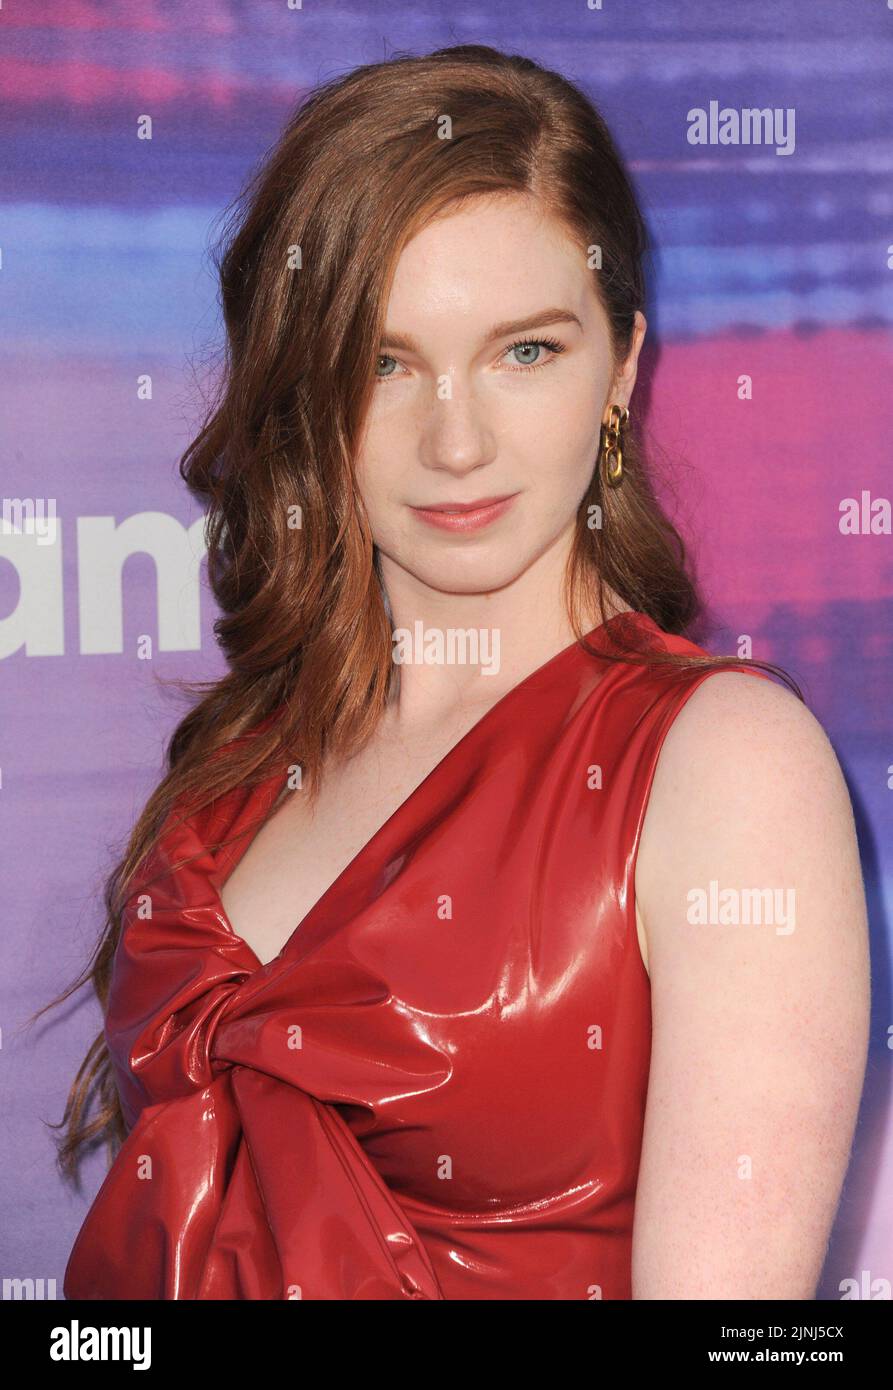 Los Angeles, CA. 11th Aug, 2022. Annalise Basso at arrivals for Variety's Power of Young Hollywood, NeueHouse Hollywood, Los Angeles, CA August 11, 2022. Credit: Elizabeth Goodenough/Everett Collection/Alamy Live News Stock Photo